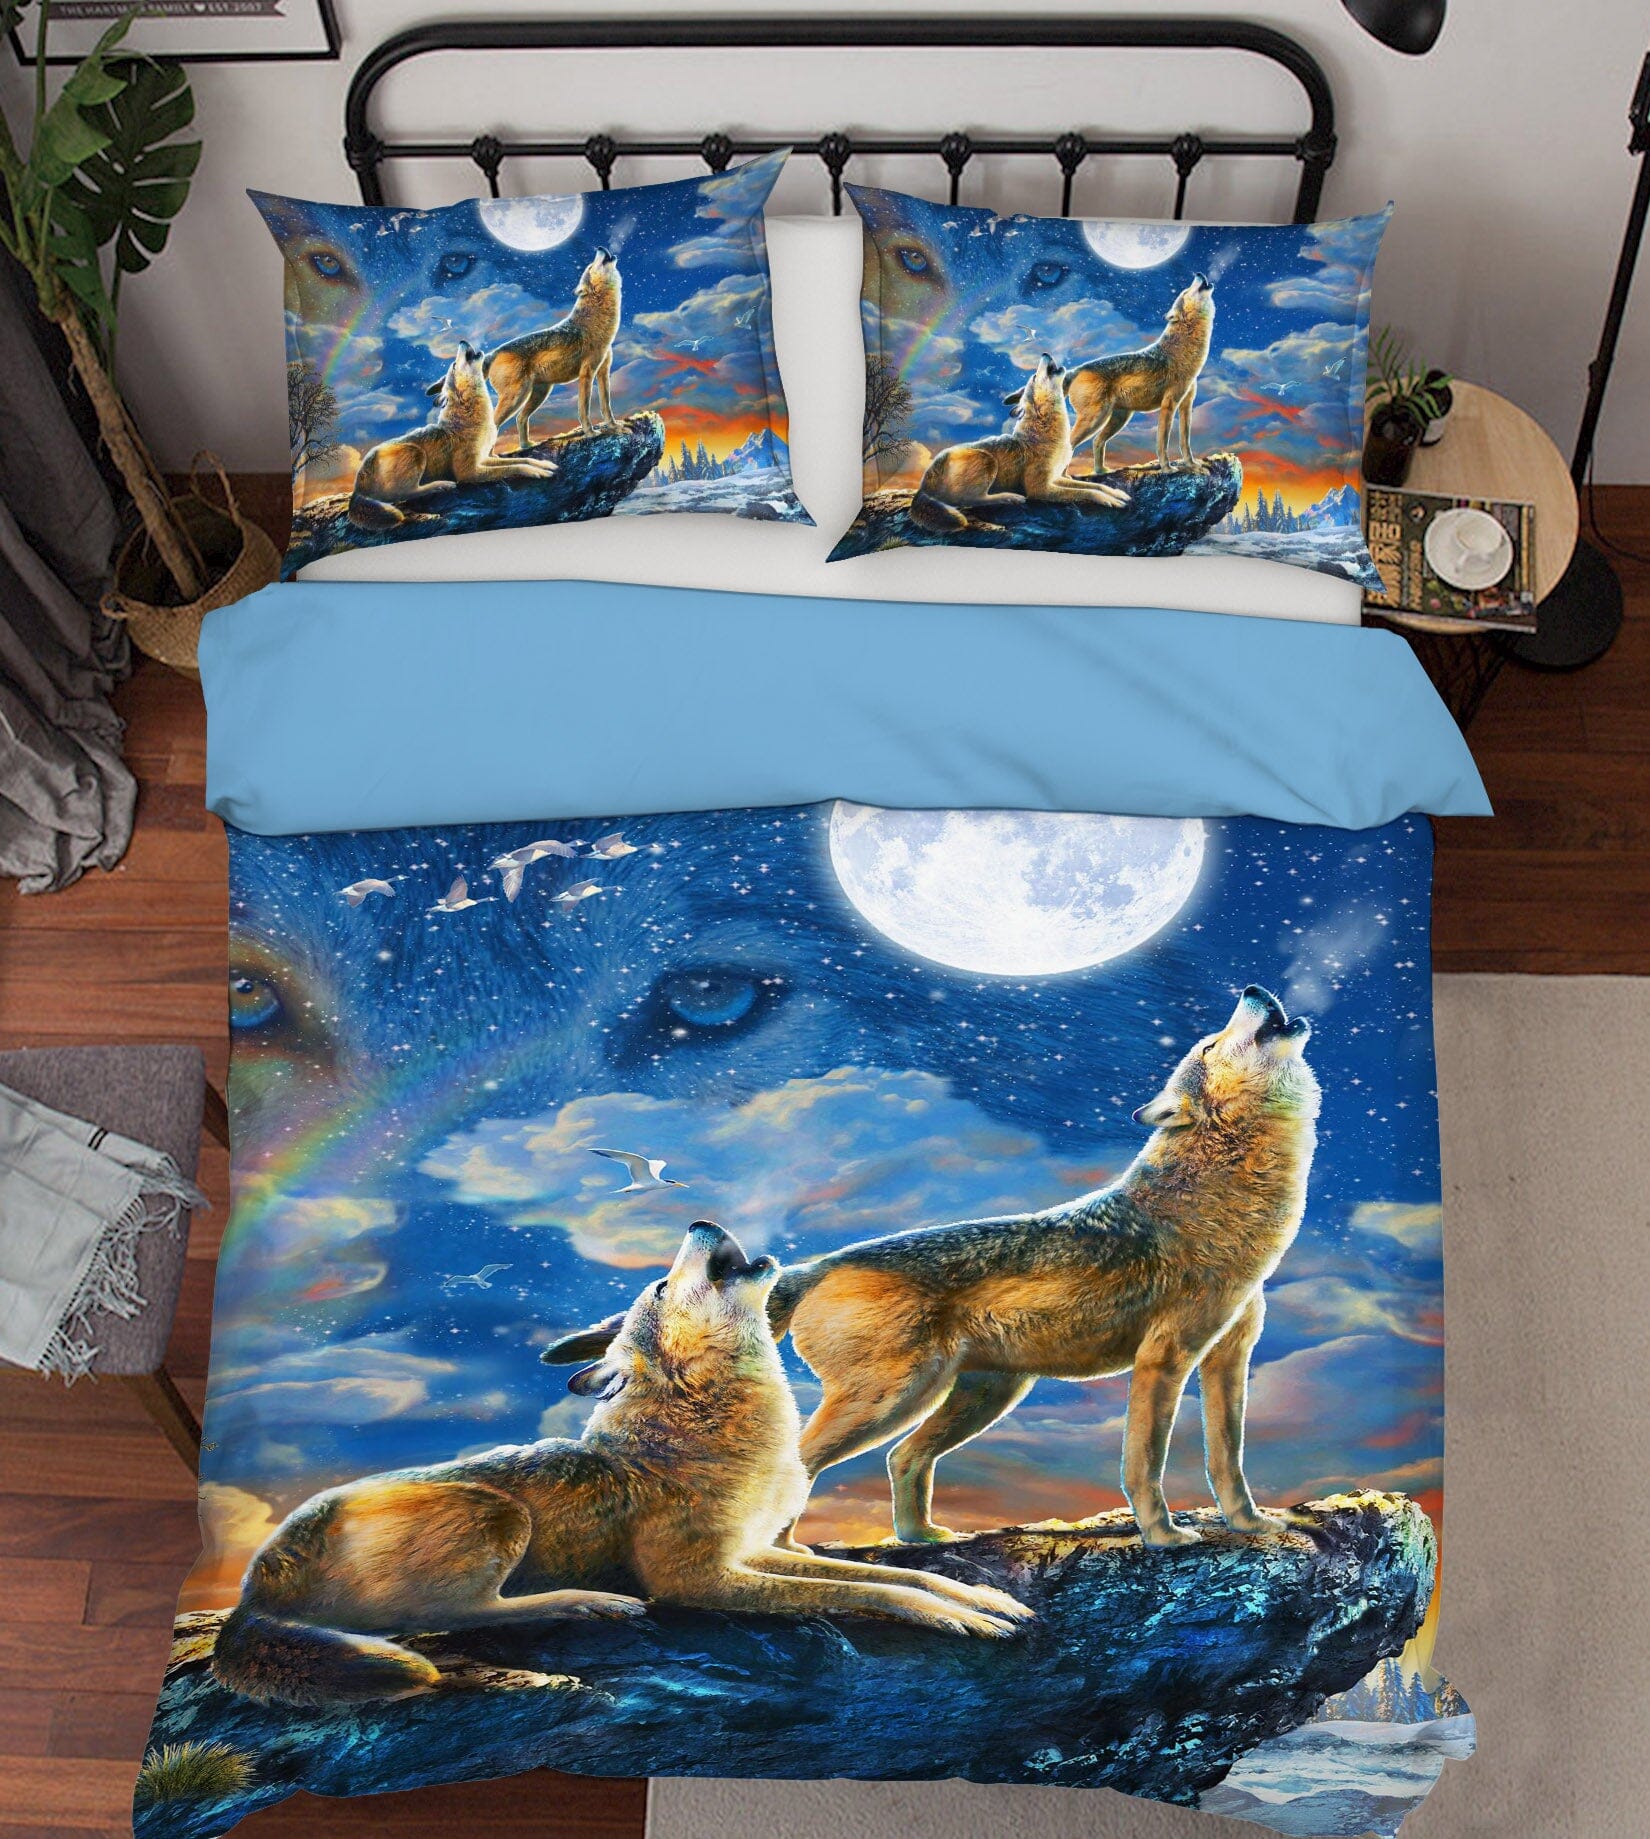 3D Wolverine 2134 Adrian Chesterman Bedding Bed Pillowcases Quilt Quiet Covers AJ Creativity Home 